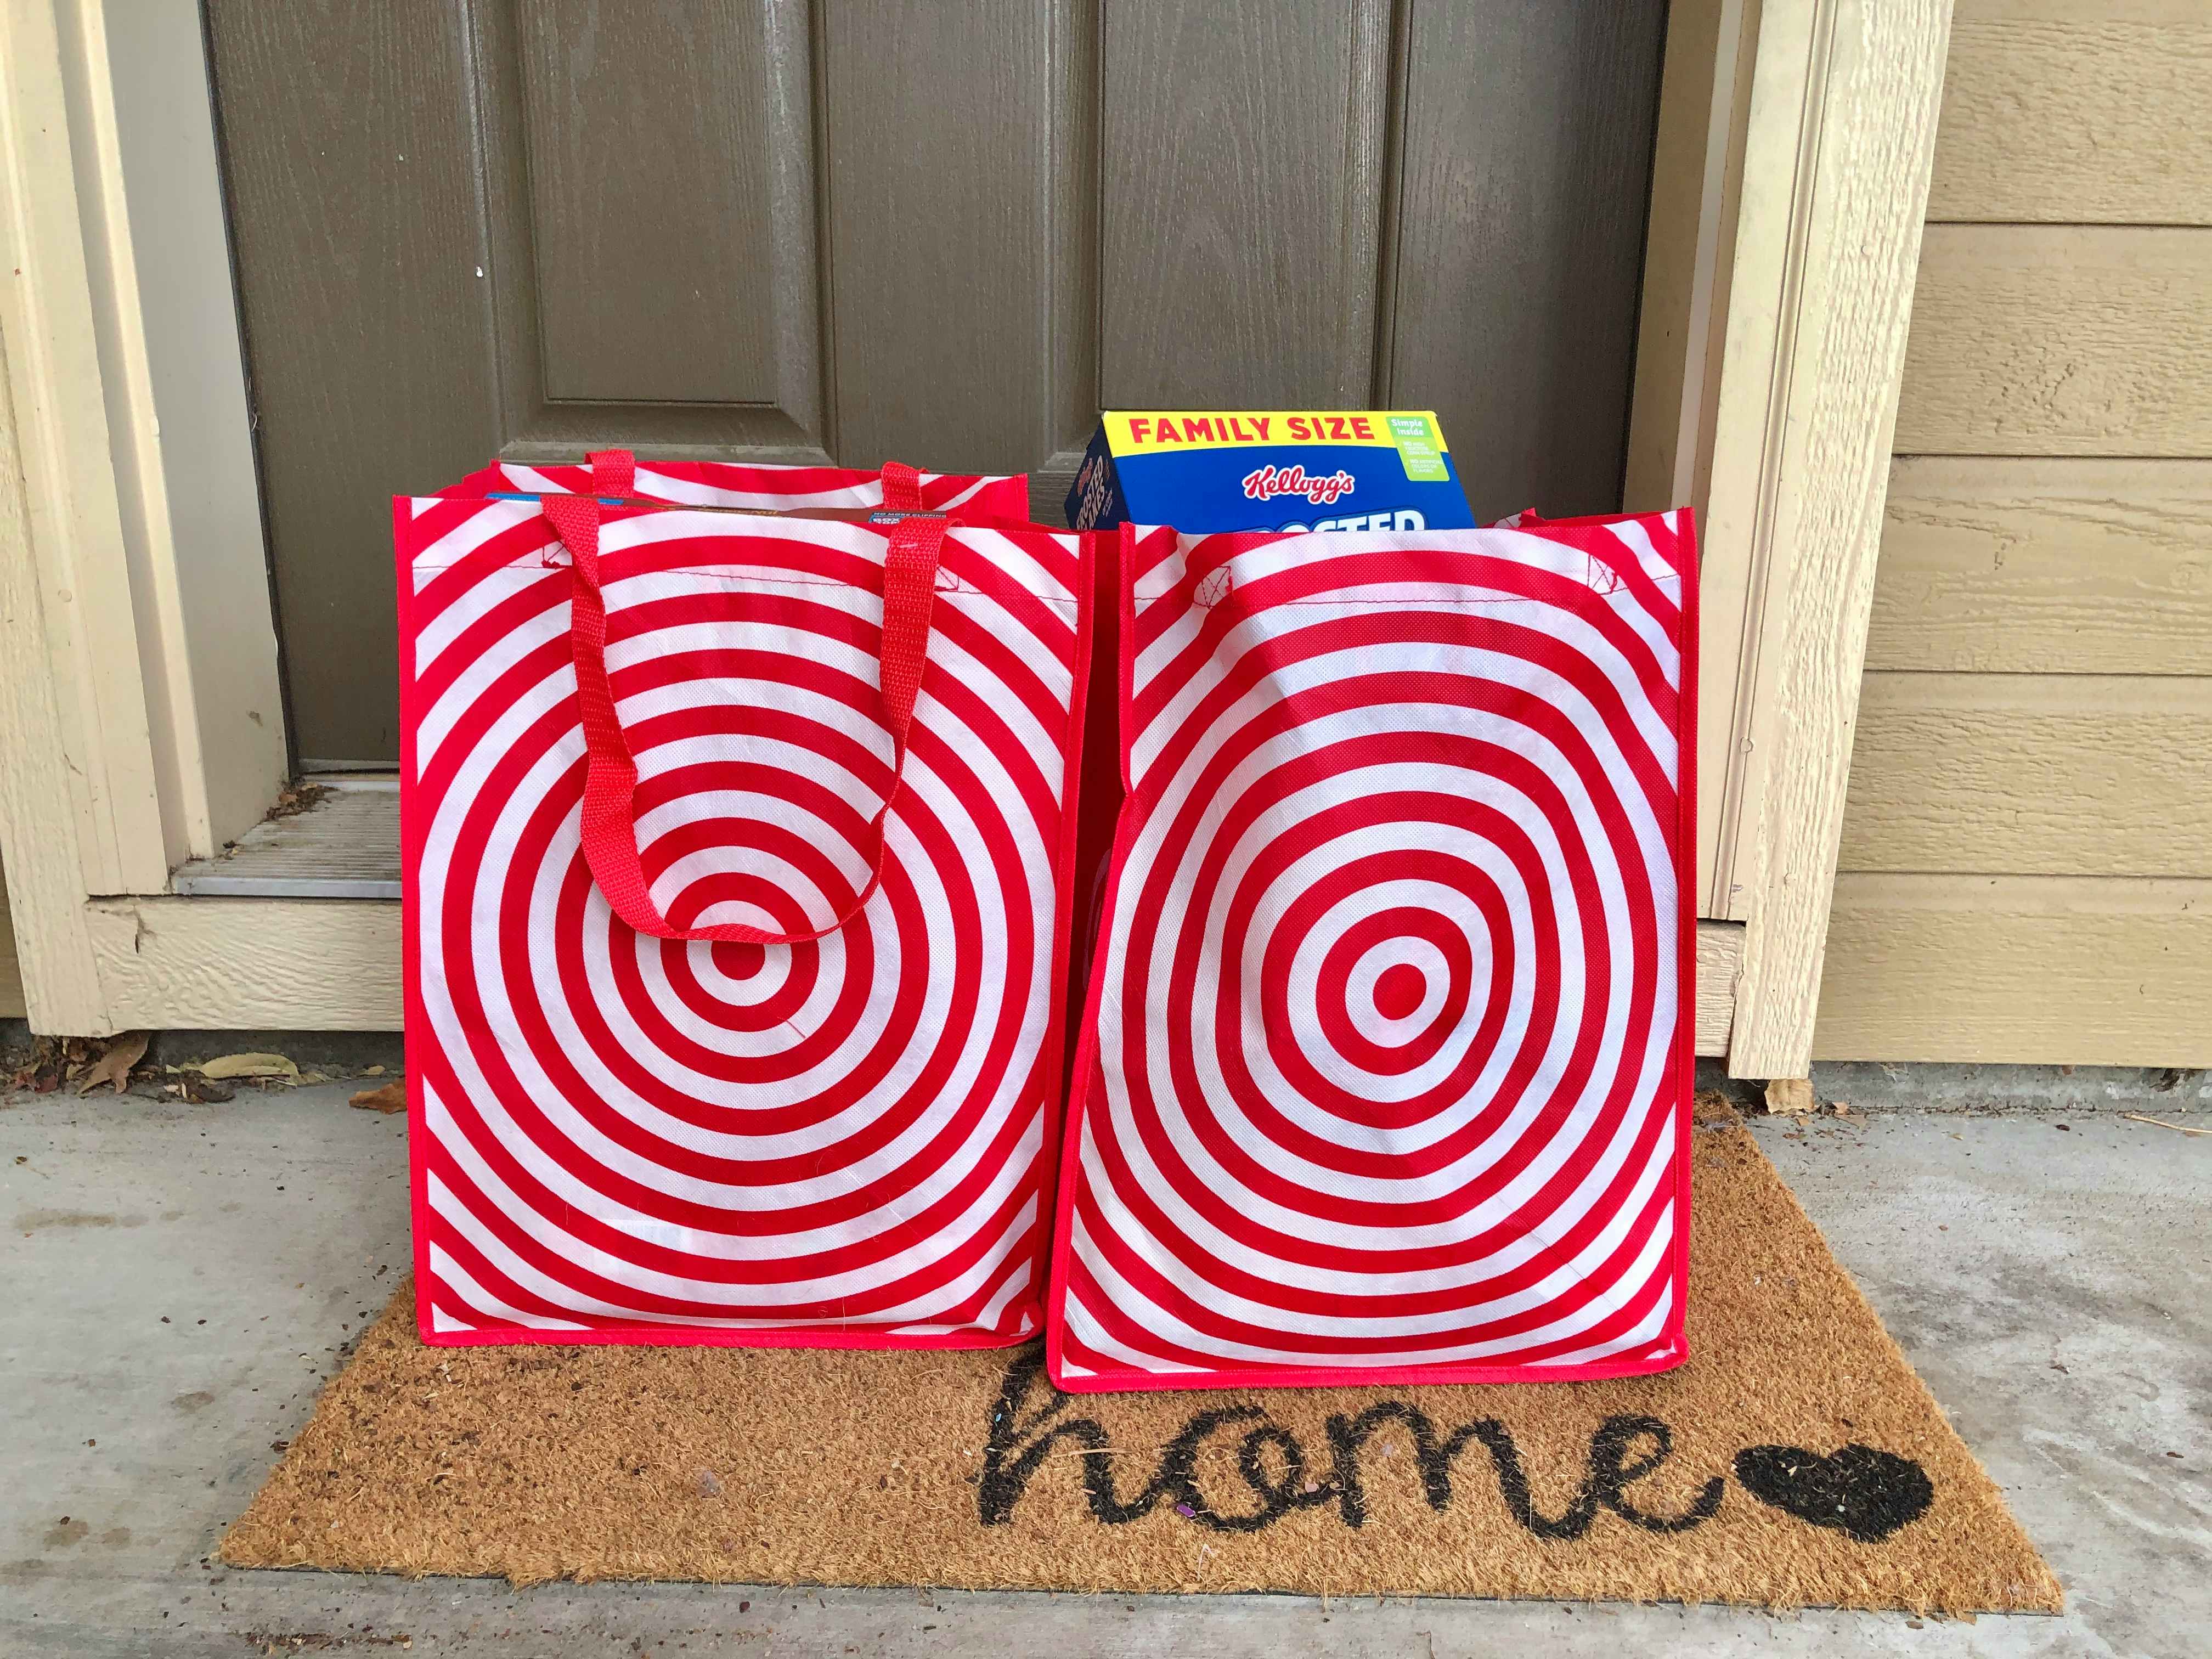 Two Target reusable grocery bags on a welcome mat on front doorstep.